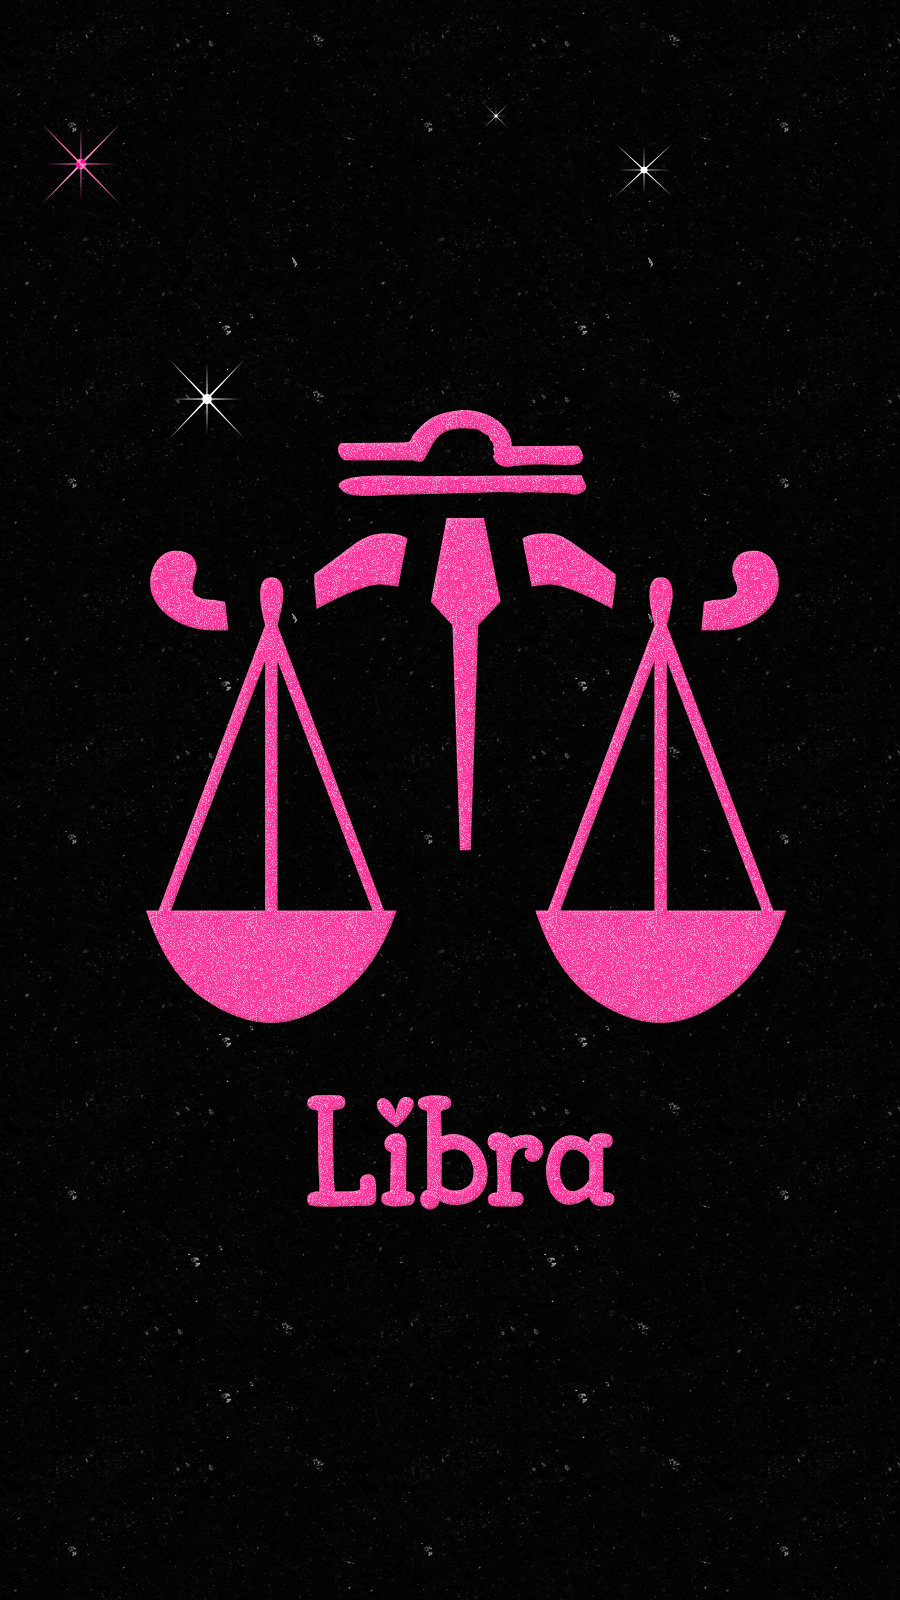 A black background with a pink libra symbol in the middle - Libra